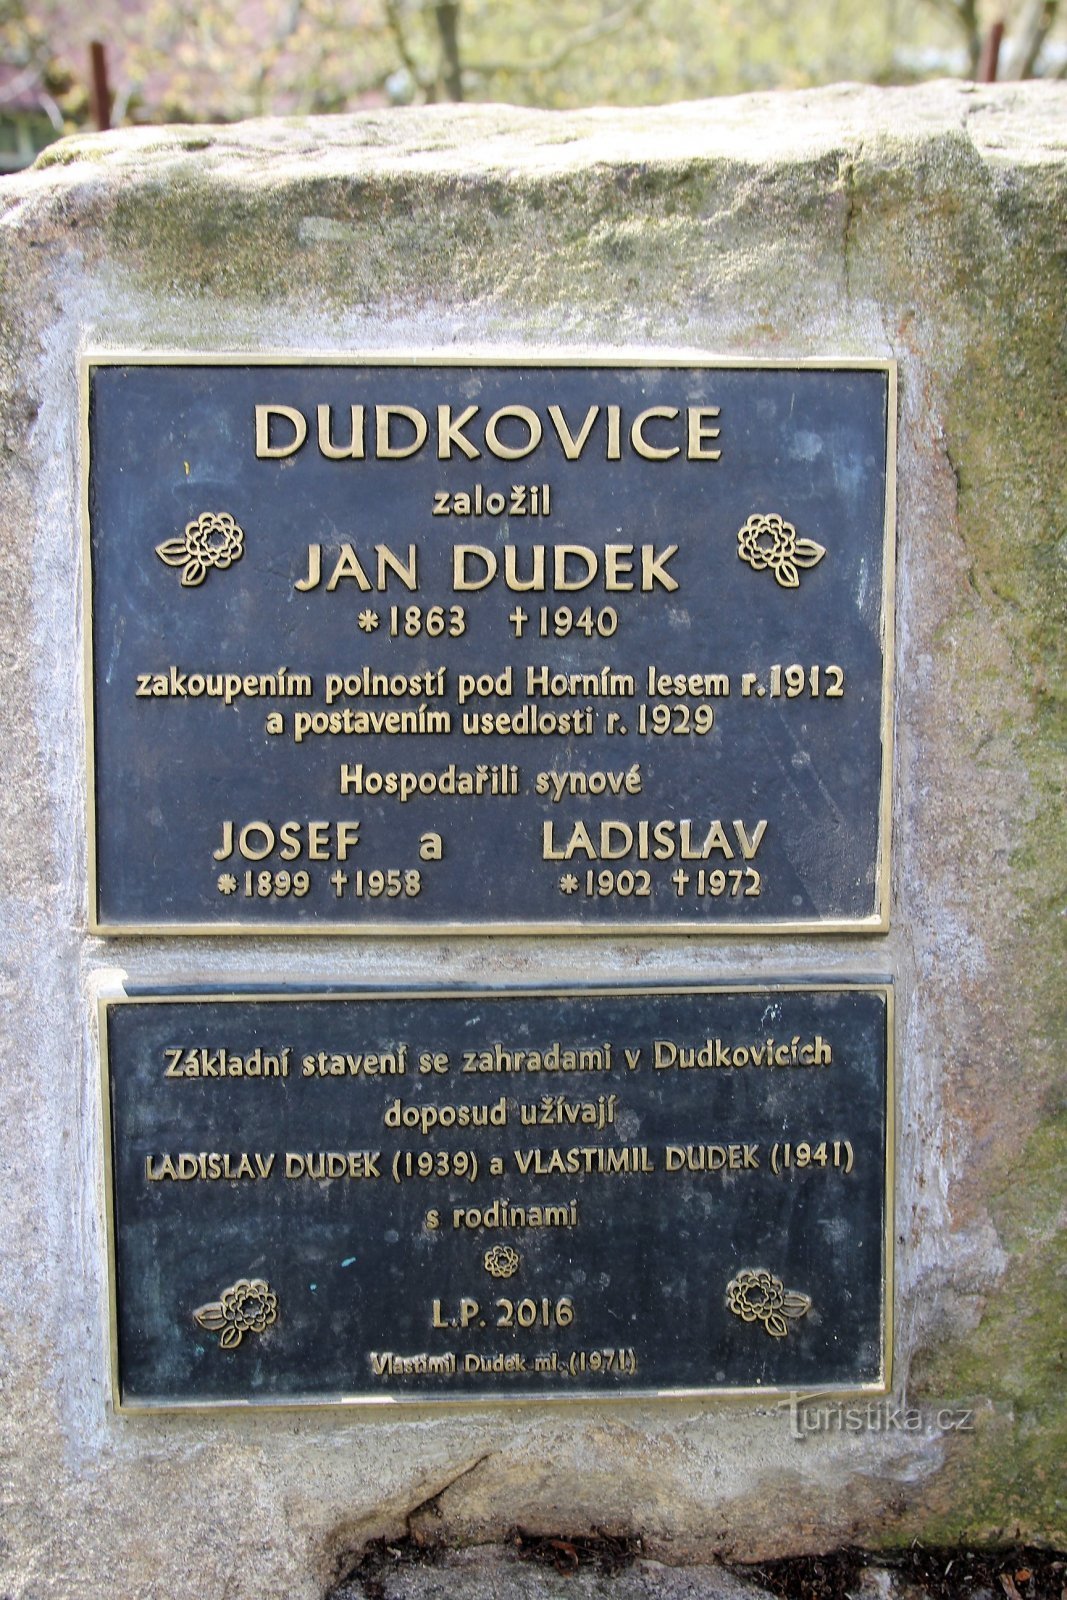 Bronze plates with a description of the Dudk family